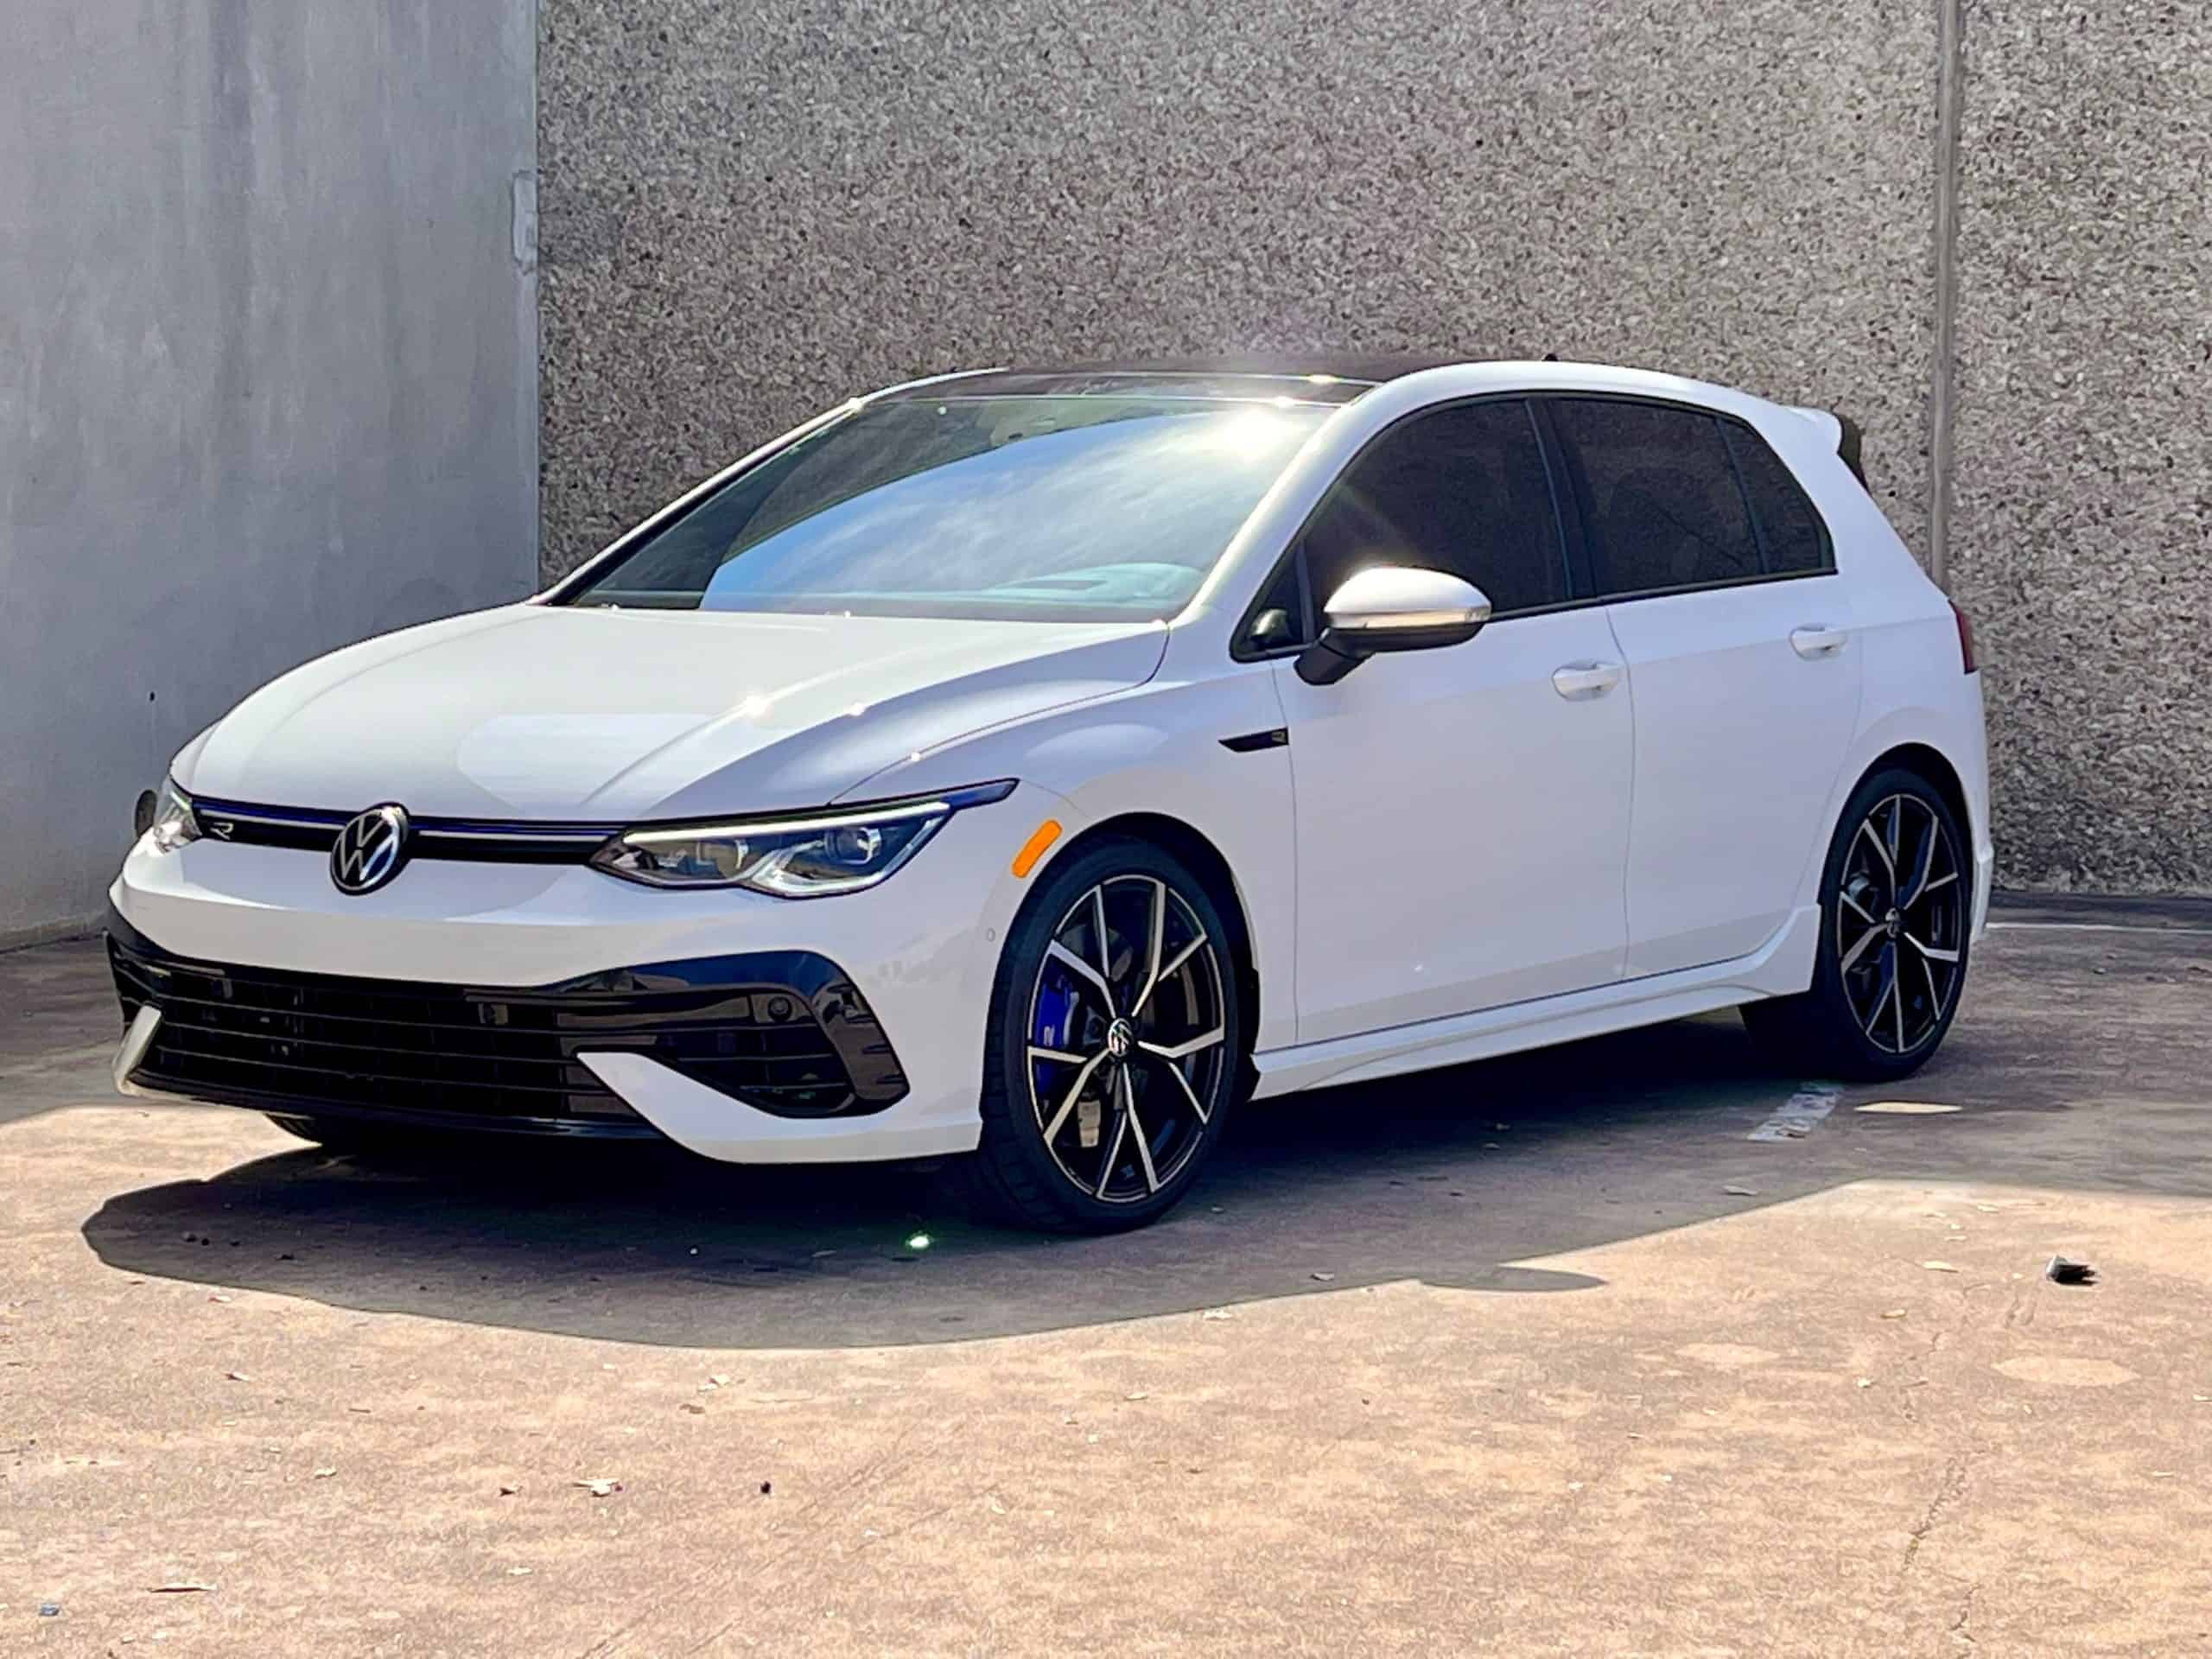 11th Gen Honda Civic Type R "In the Wild" Sightings 2022-Volkswagen-Golf-R-1-scaled